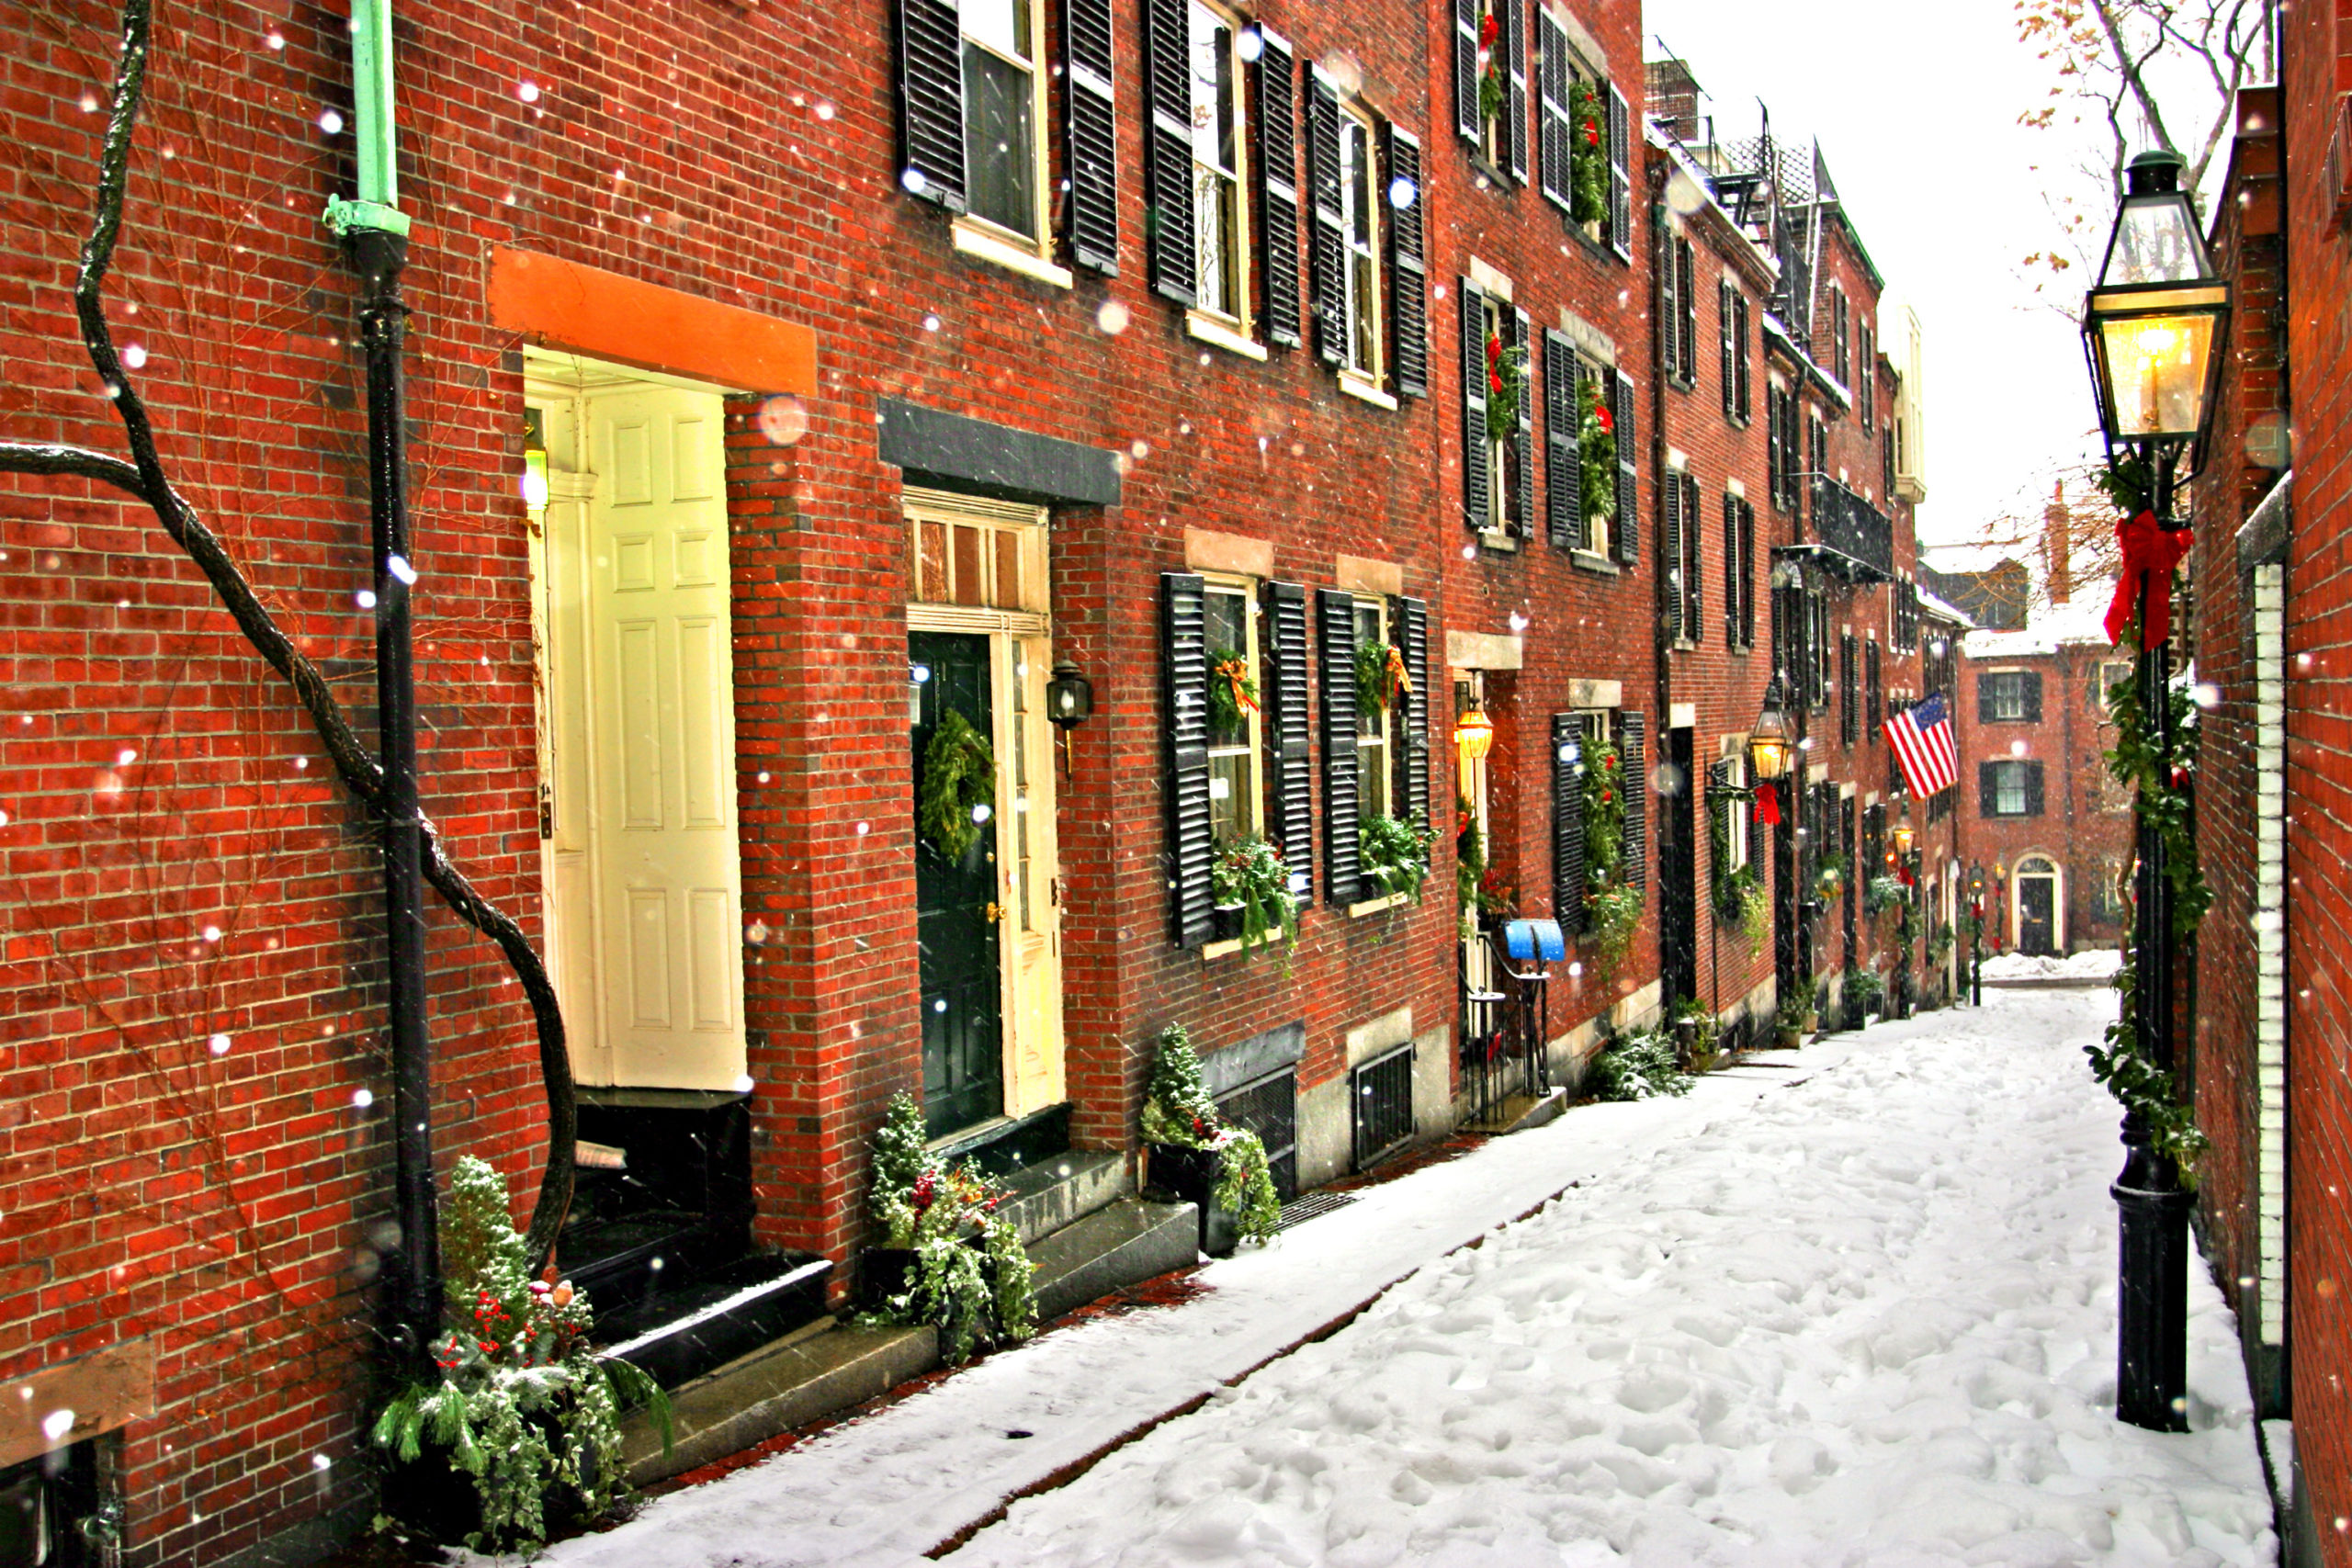 Alleyway view of a Boston winter